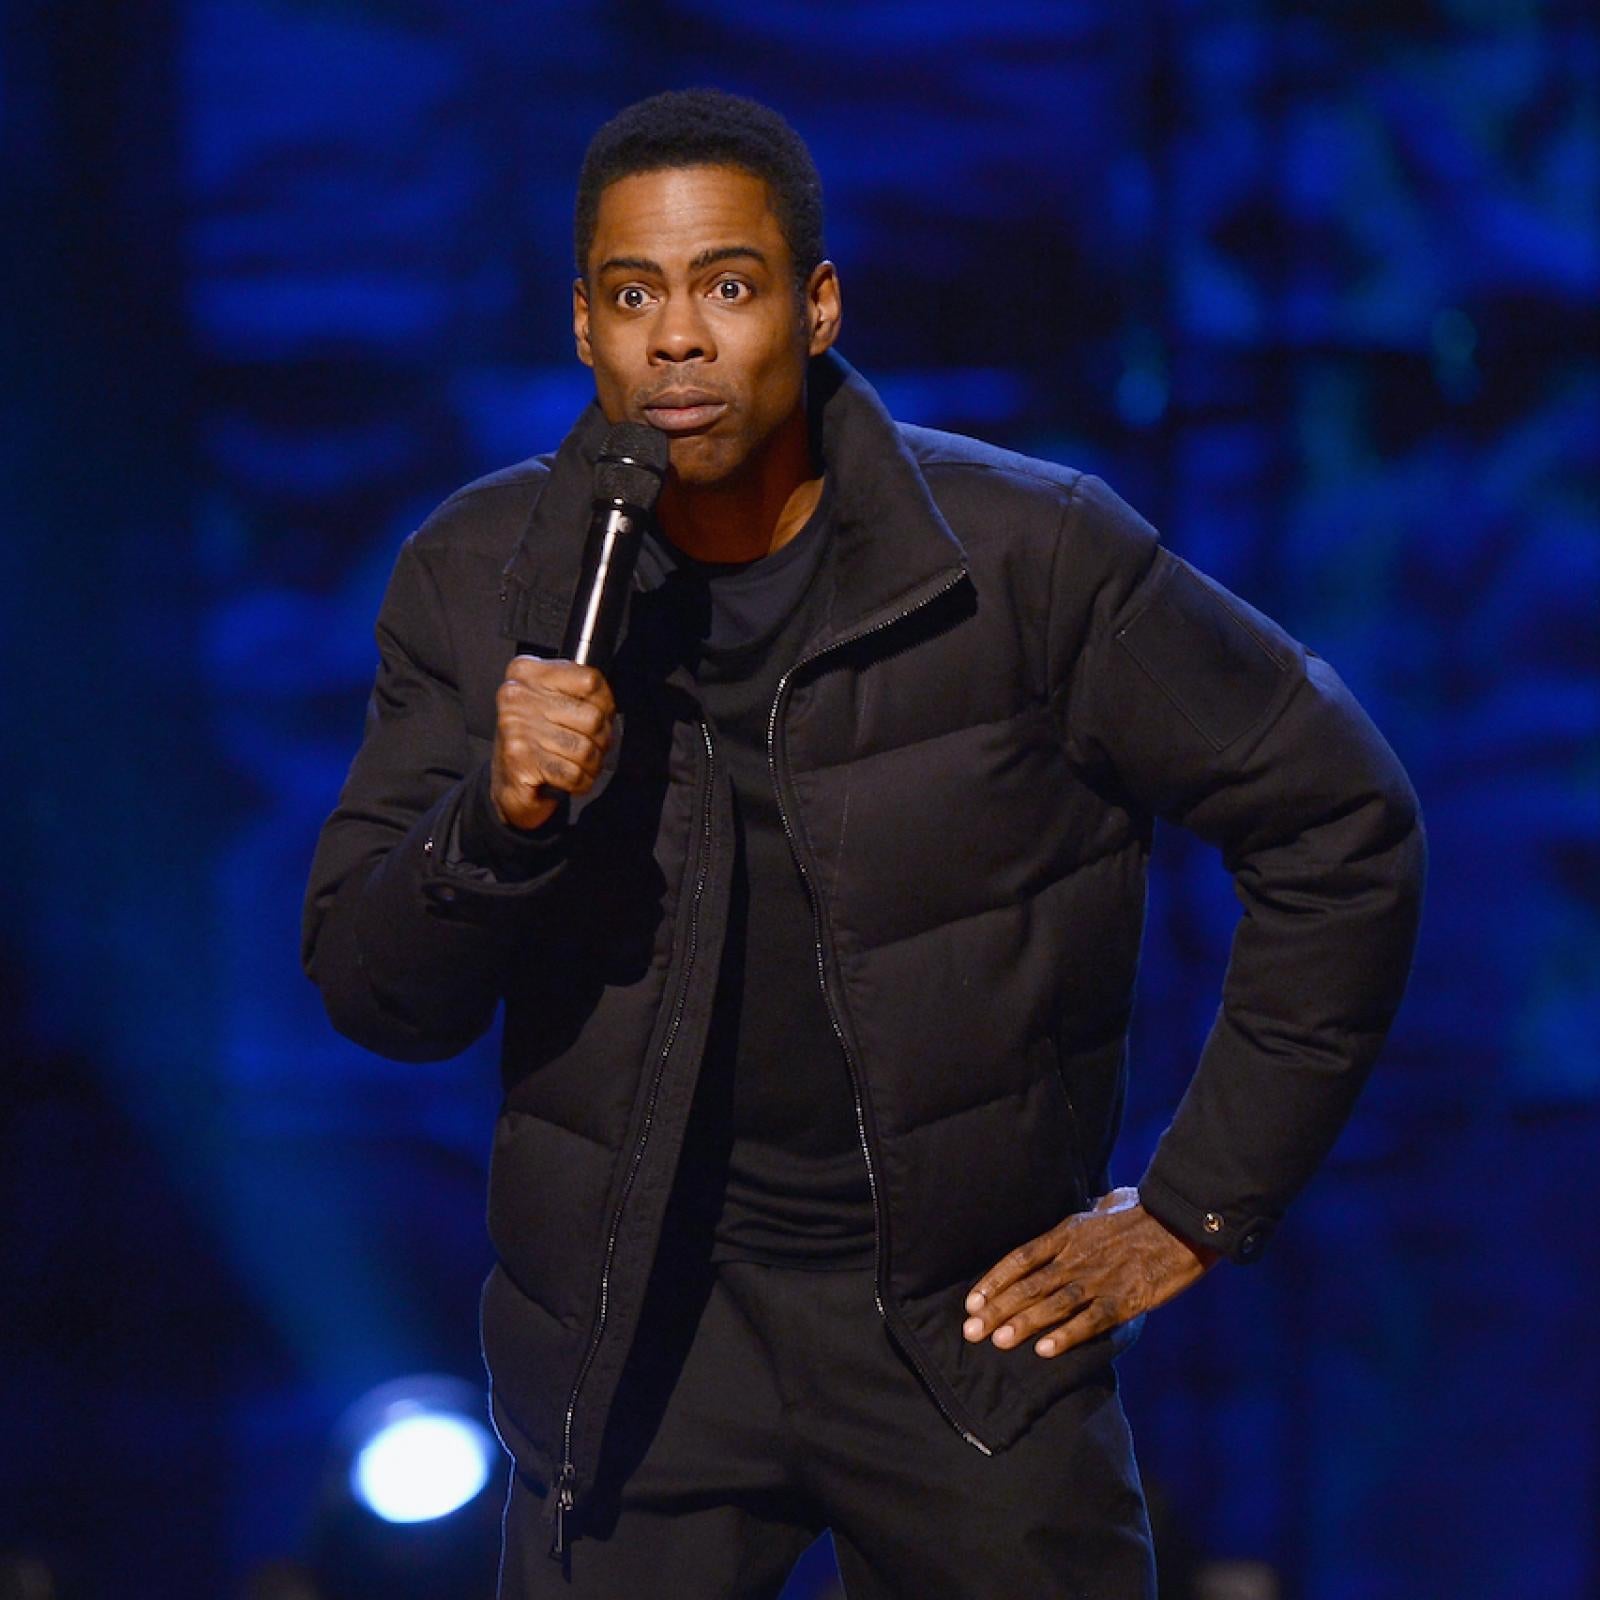 Chris Rock Fresh Air Archive Interviews with Terry Gross